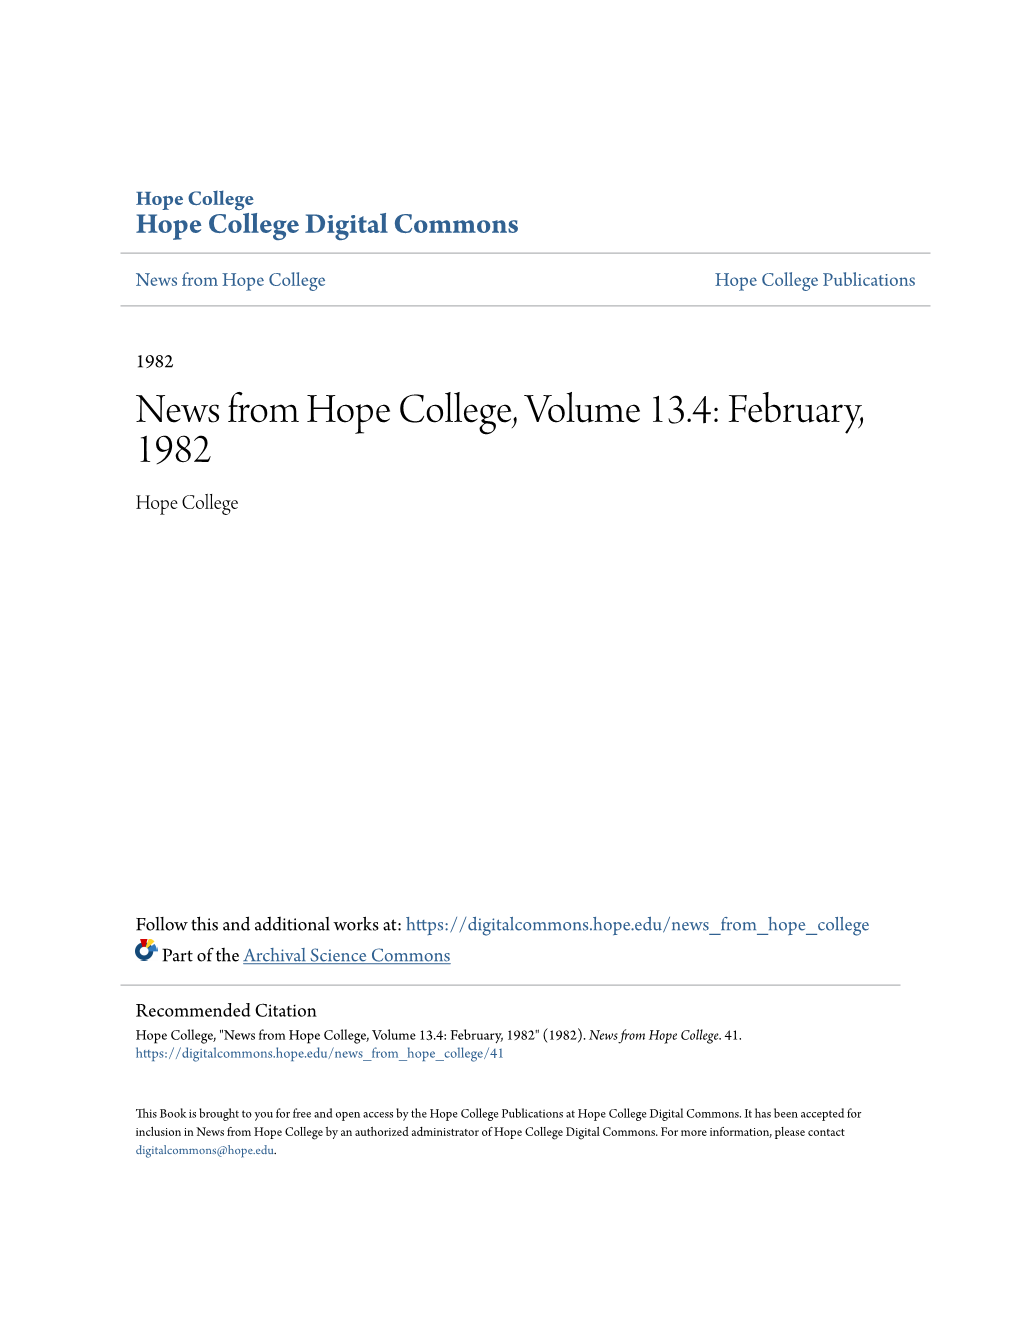 News from Hope College, Volume 13.4: February, 1982 Hope College